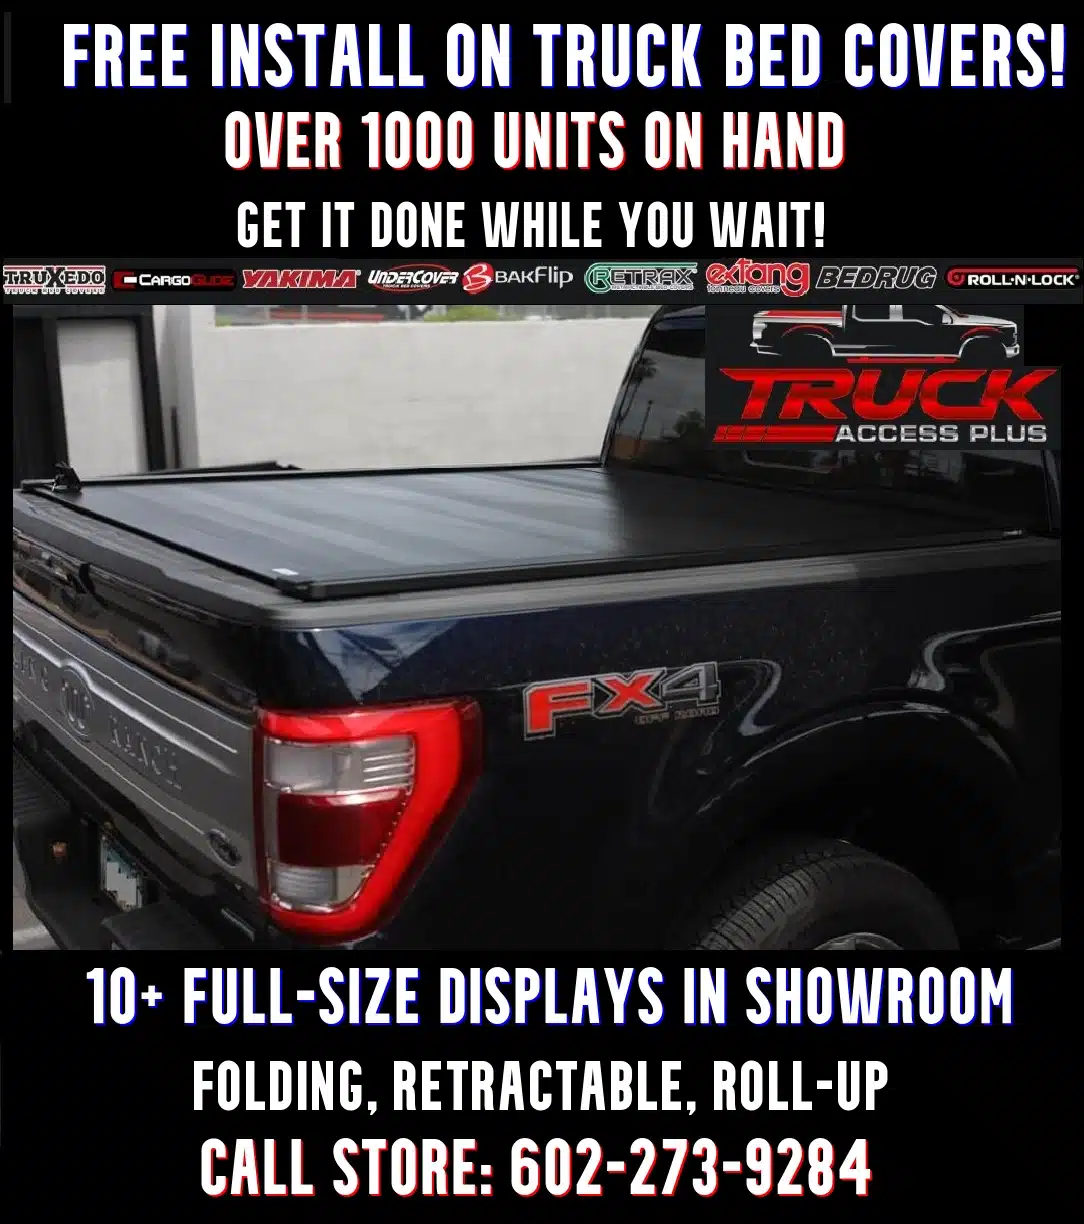 free installation on tonneau covers